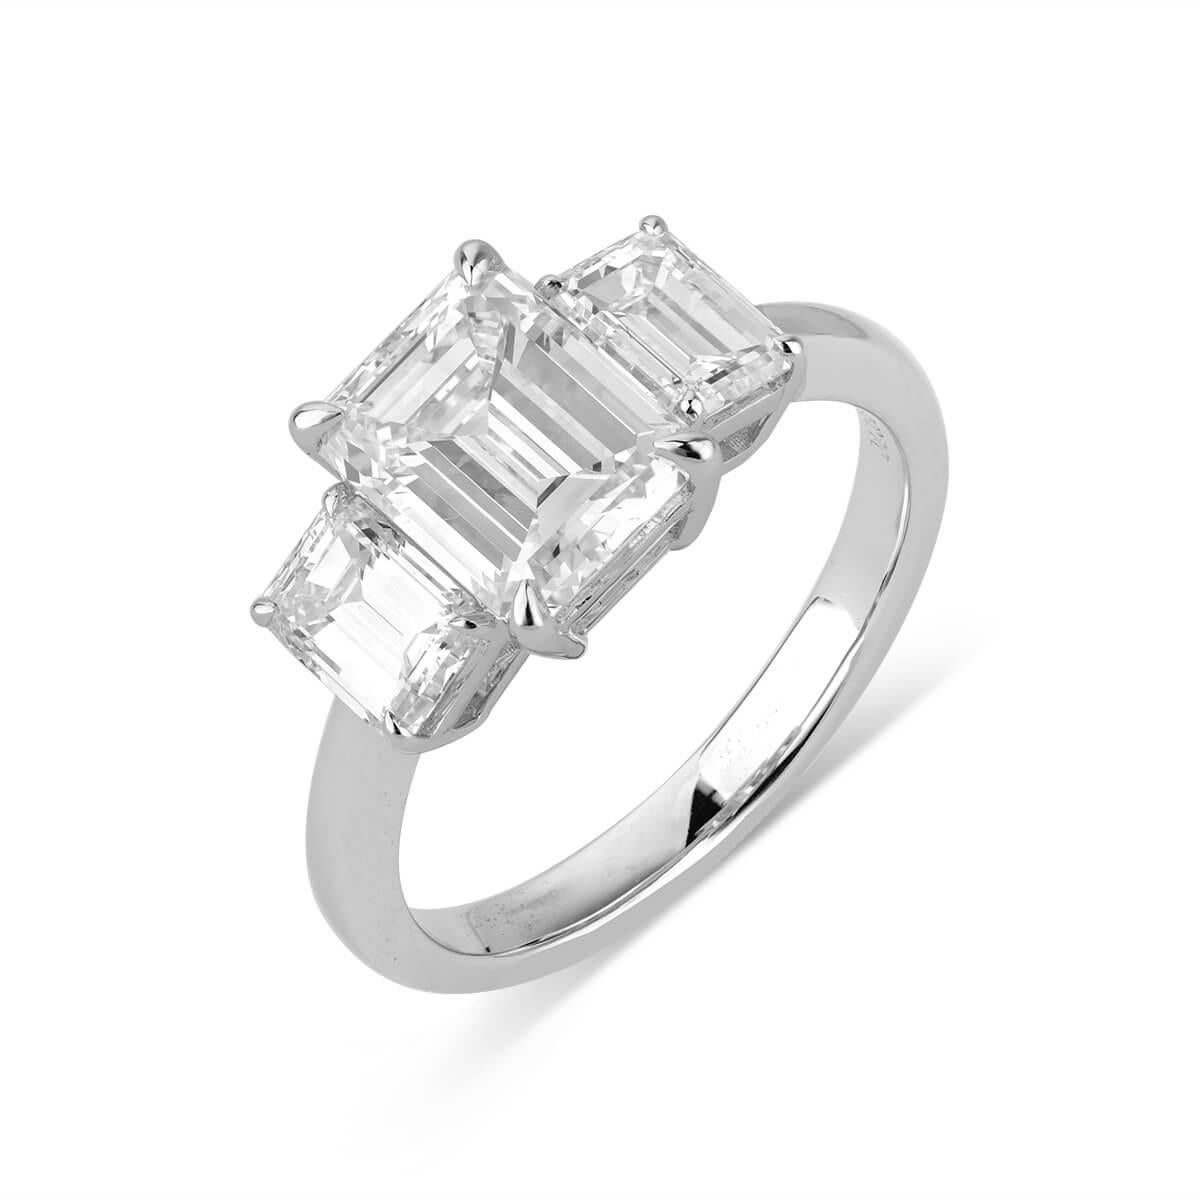 EMERALD CUT DIAMOND RING - 3.13 CT


Set in 18KT White gold


Total diamond weight: 2.03 ct

[ 1 diamond ]
Color: D
Clarity: VVS2

Total side diamond weight: 1.10 ct
[ 2 diamonds ]
Color: D-F
Clarity: VS

Total ring weight: 3.91 grams


GIA